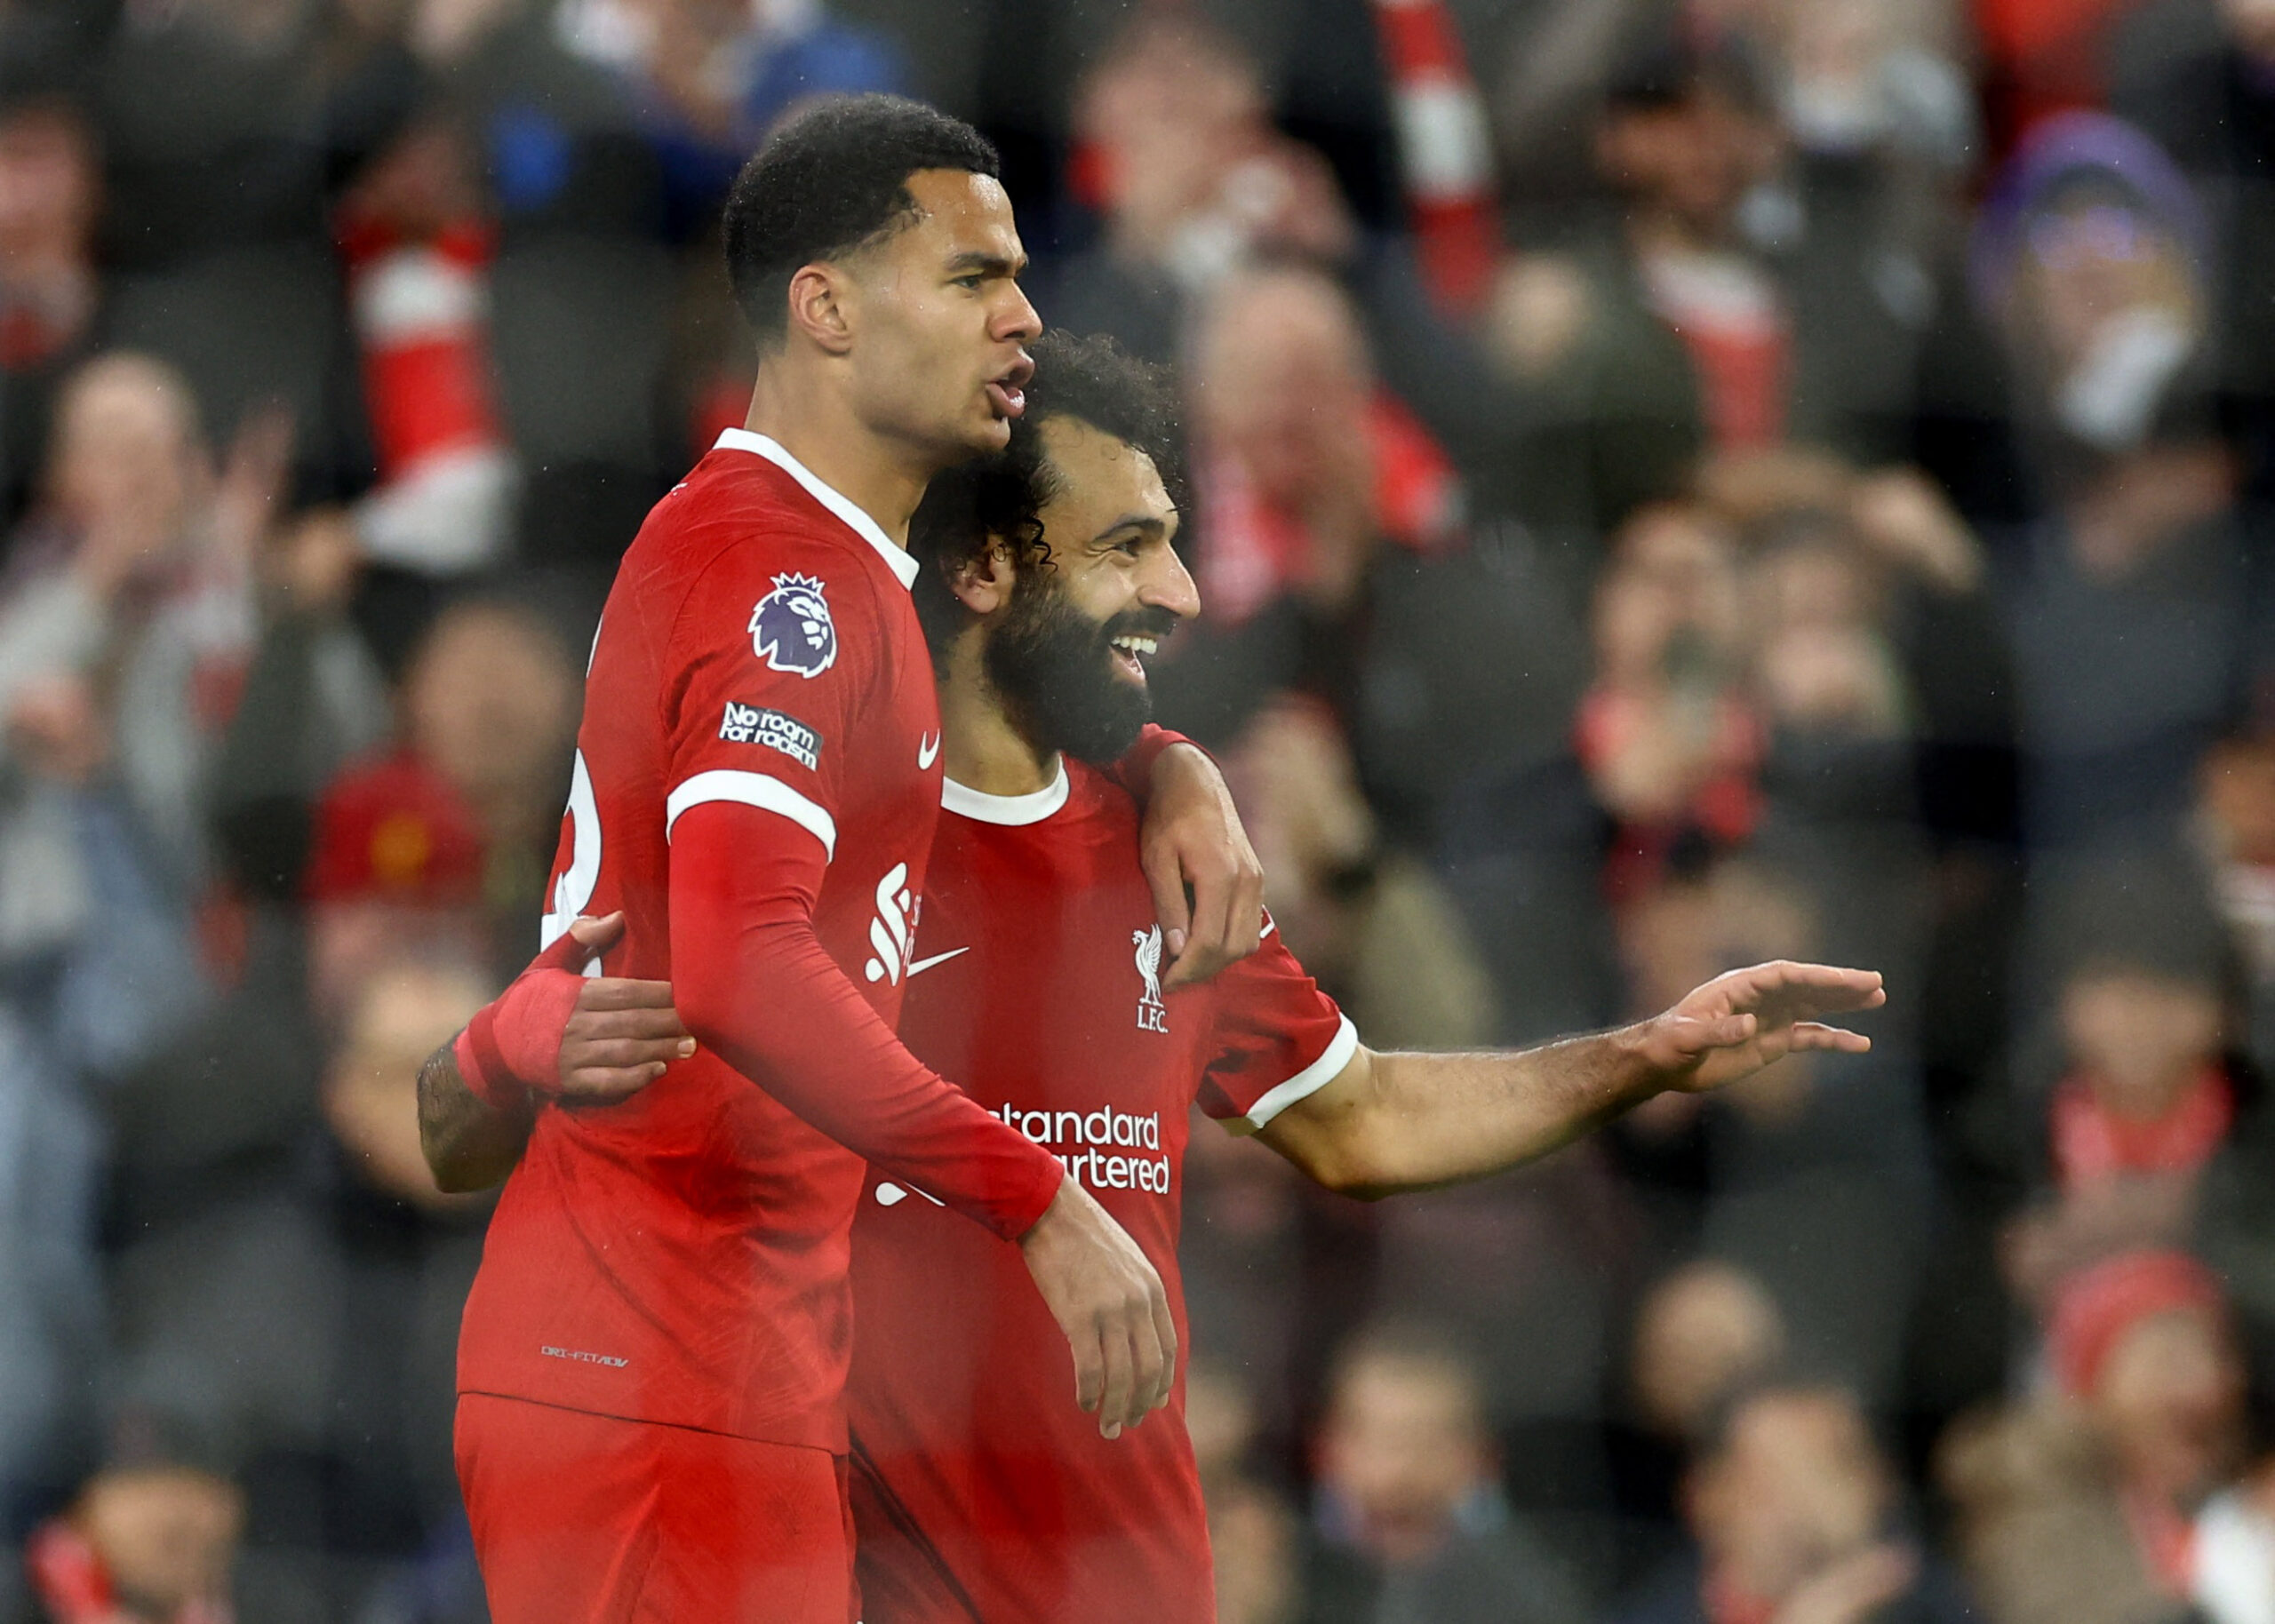 Mohamed Salah scores twice as Liverpool beat Newcastle United